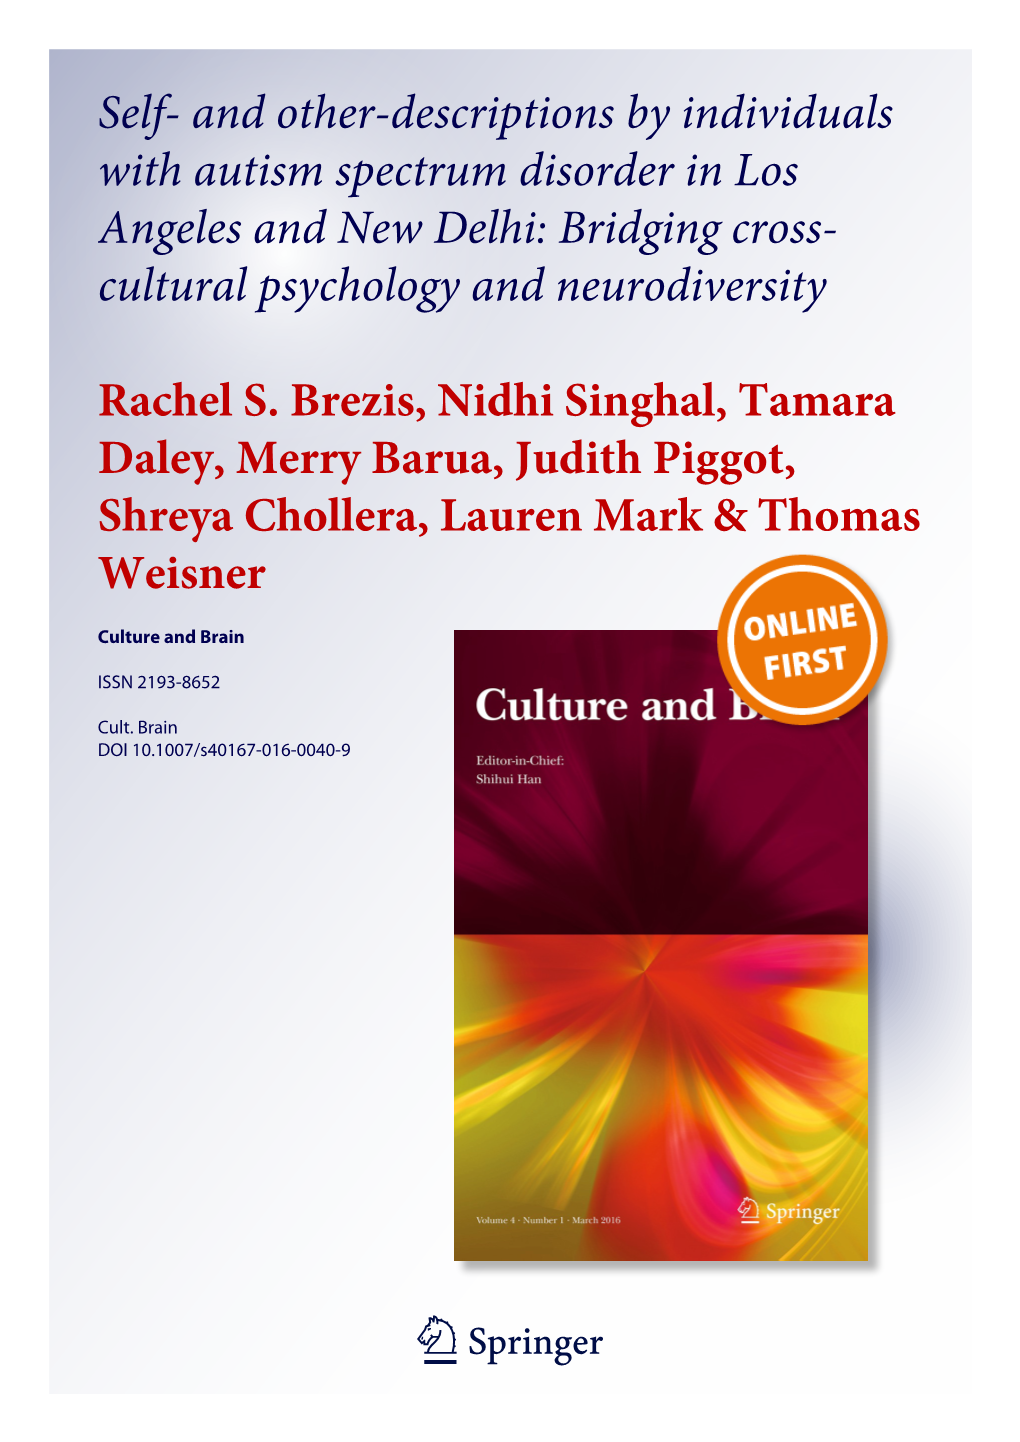 Self- and Other-Descriptions by Individuals with Autism Spectrum Disorder in Los Angeles and New Delhi: Bridging Cross- Cultural Psychology and Neurodiversity